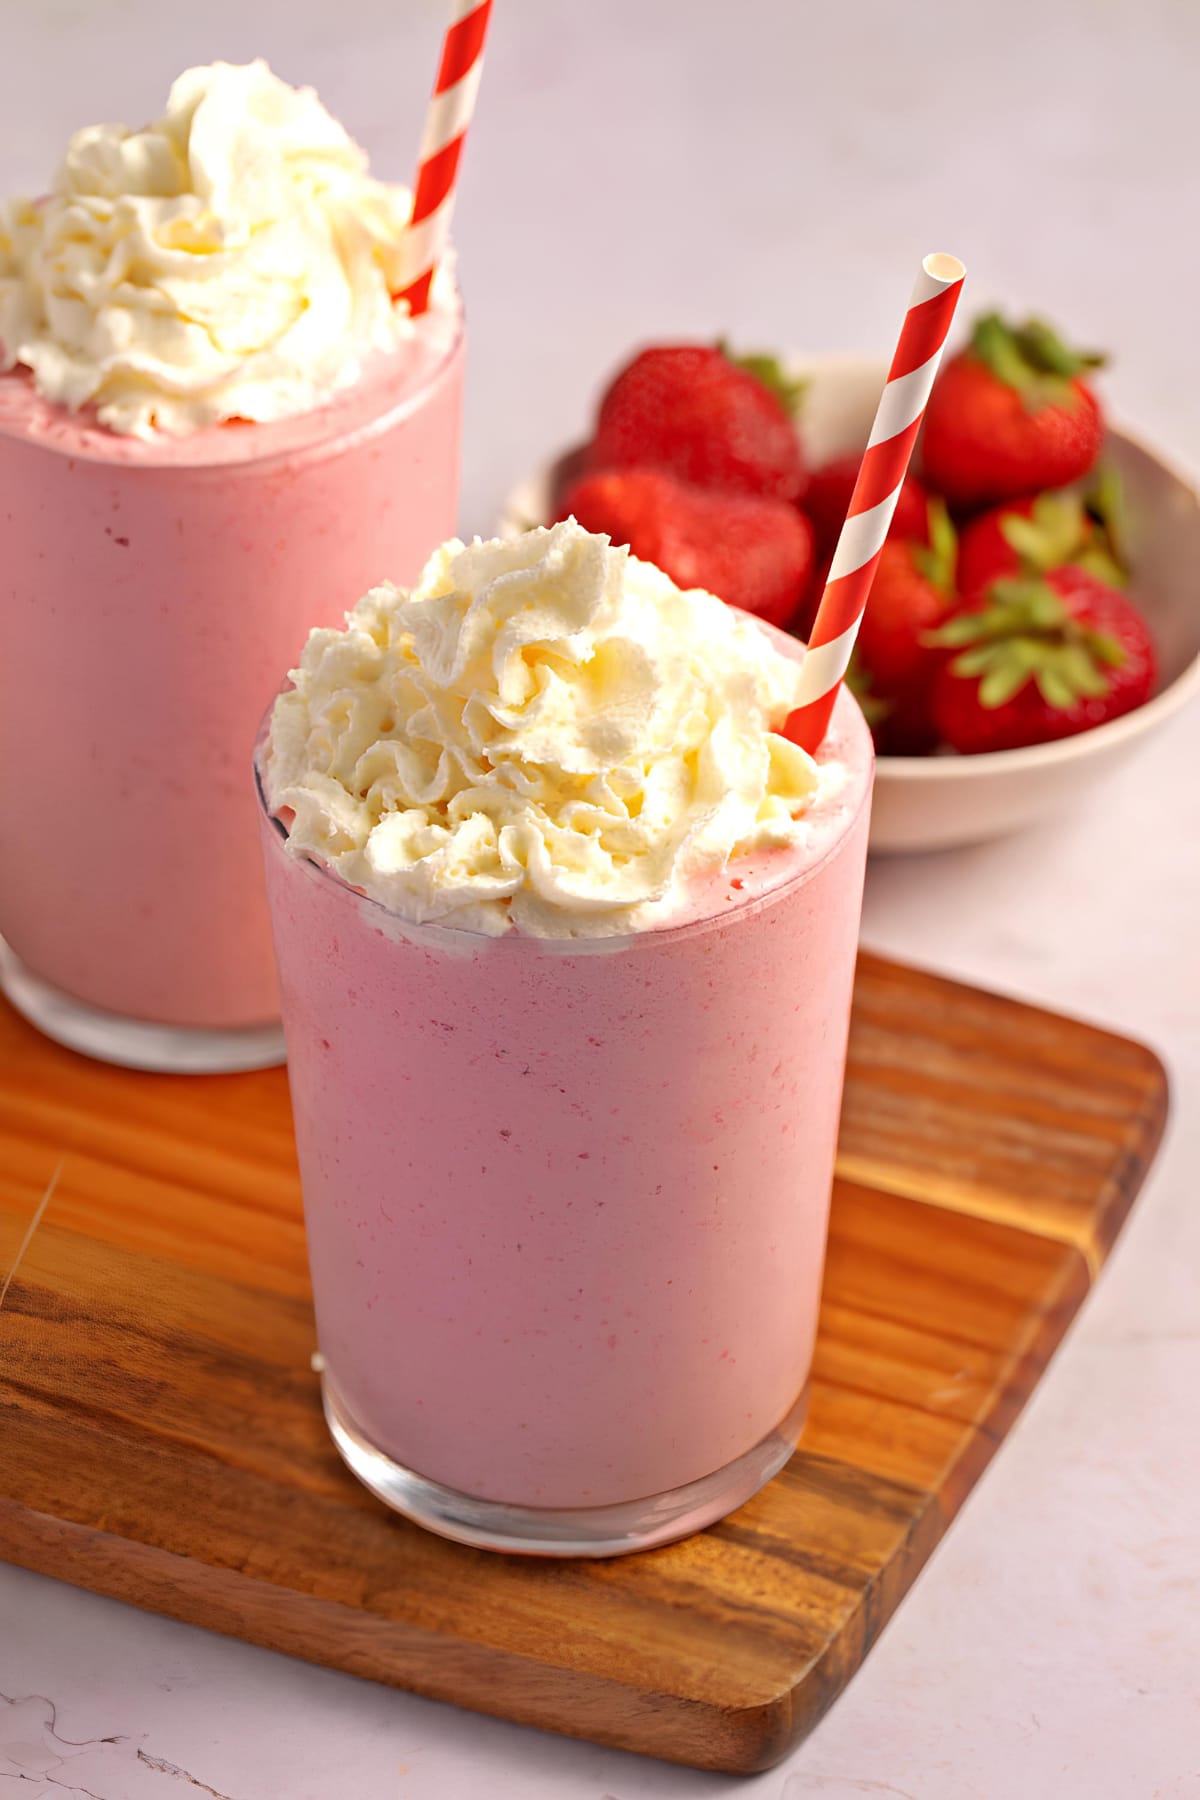 Creamy strawberry cappuccino on glasses served with whipped cream on top.